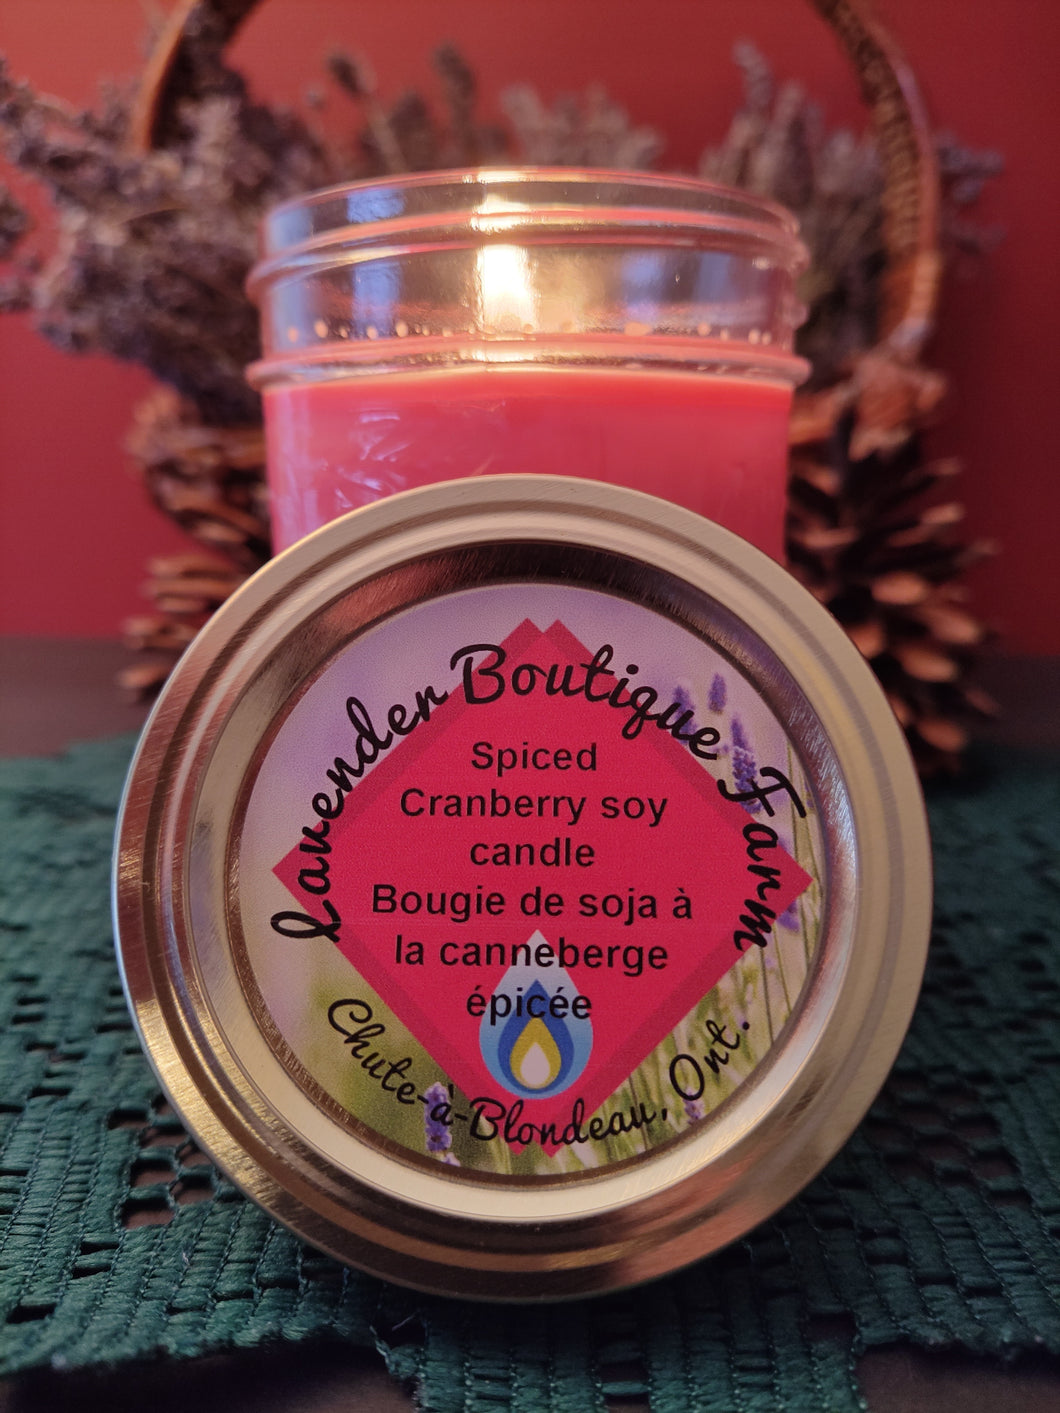 Spiced Cranberry soy candle